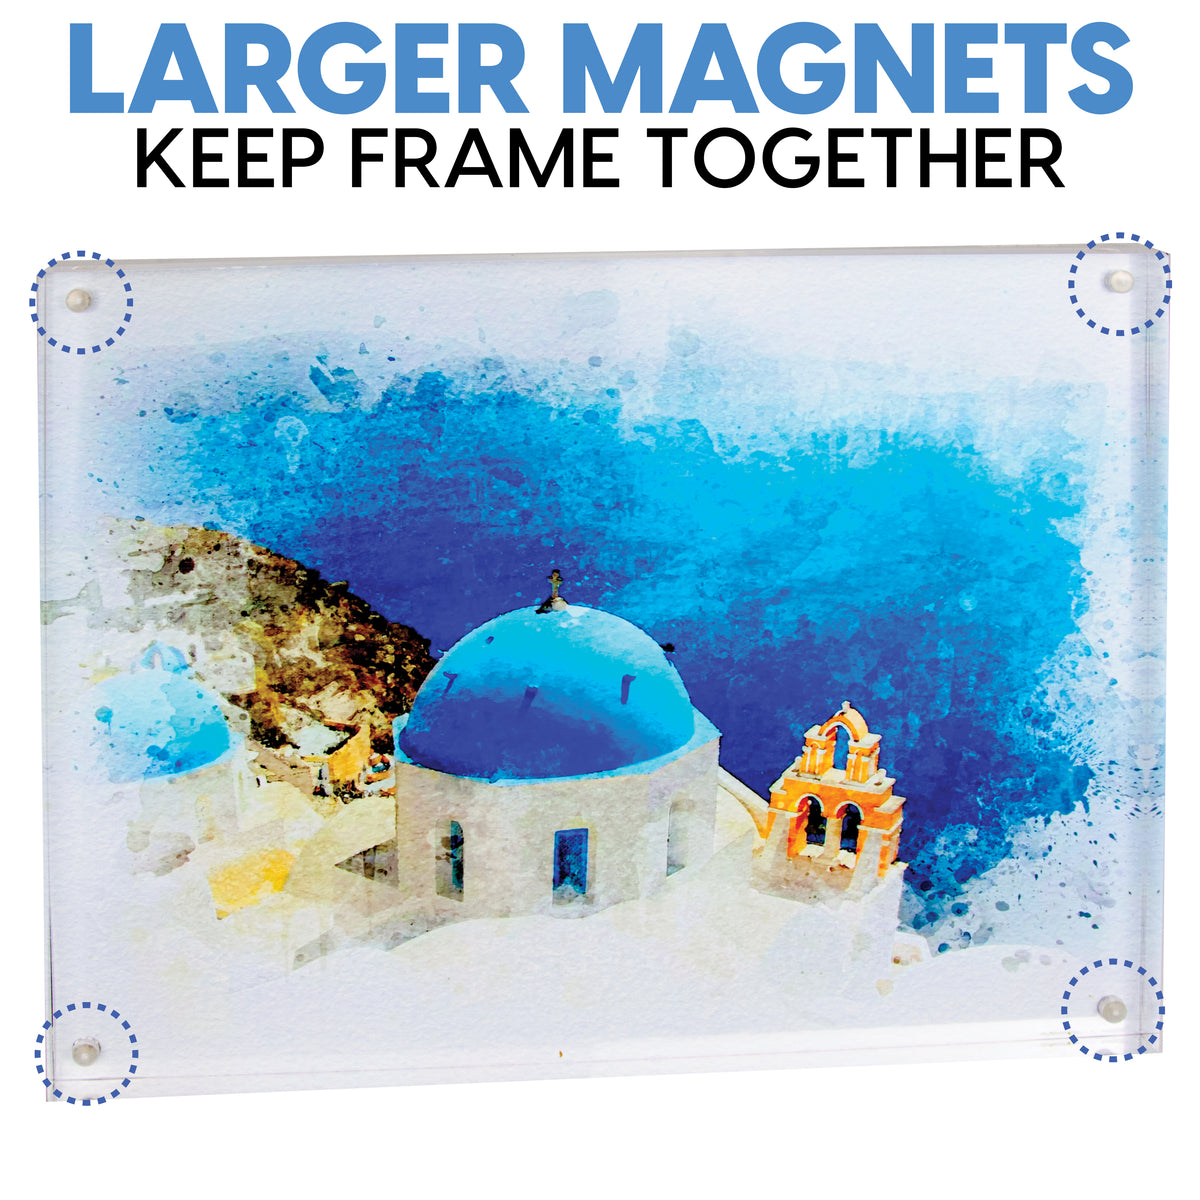 8"x10" Double-Sided Acrylic Magnetic Picture Frame